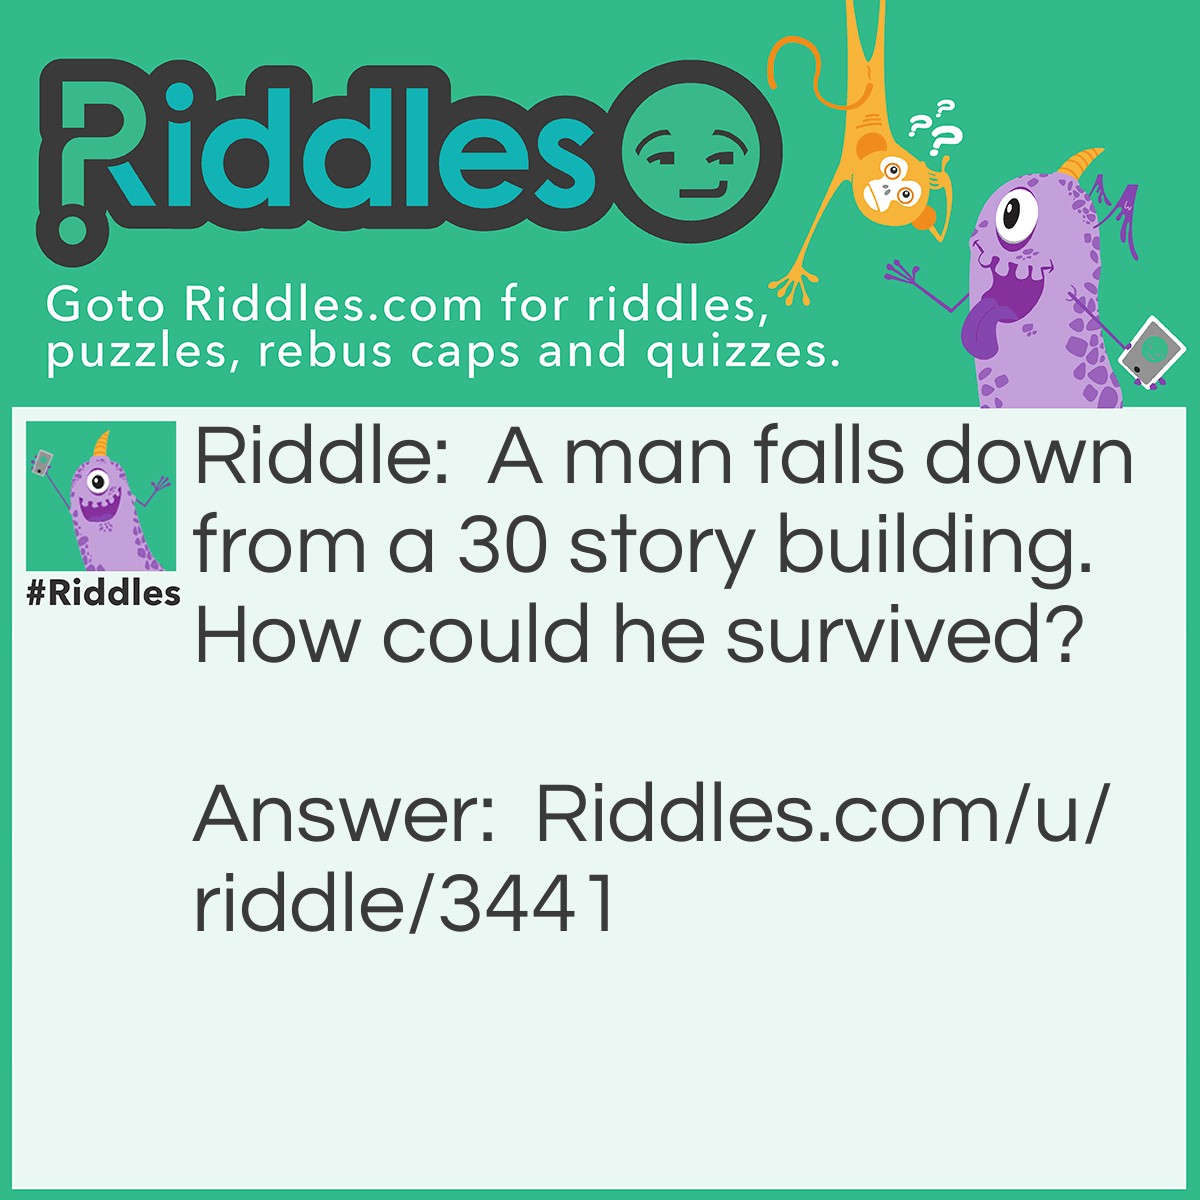 Riddle: A man falls down from a 30 story building. How could he survived? Answer: He was on the 1st floor!